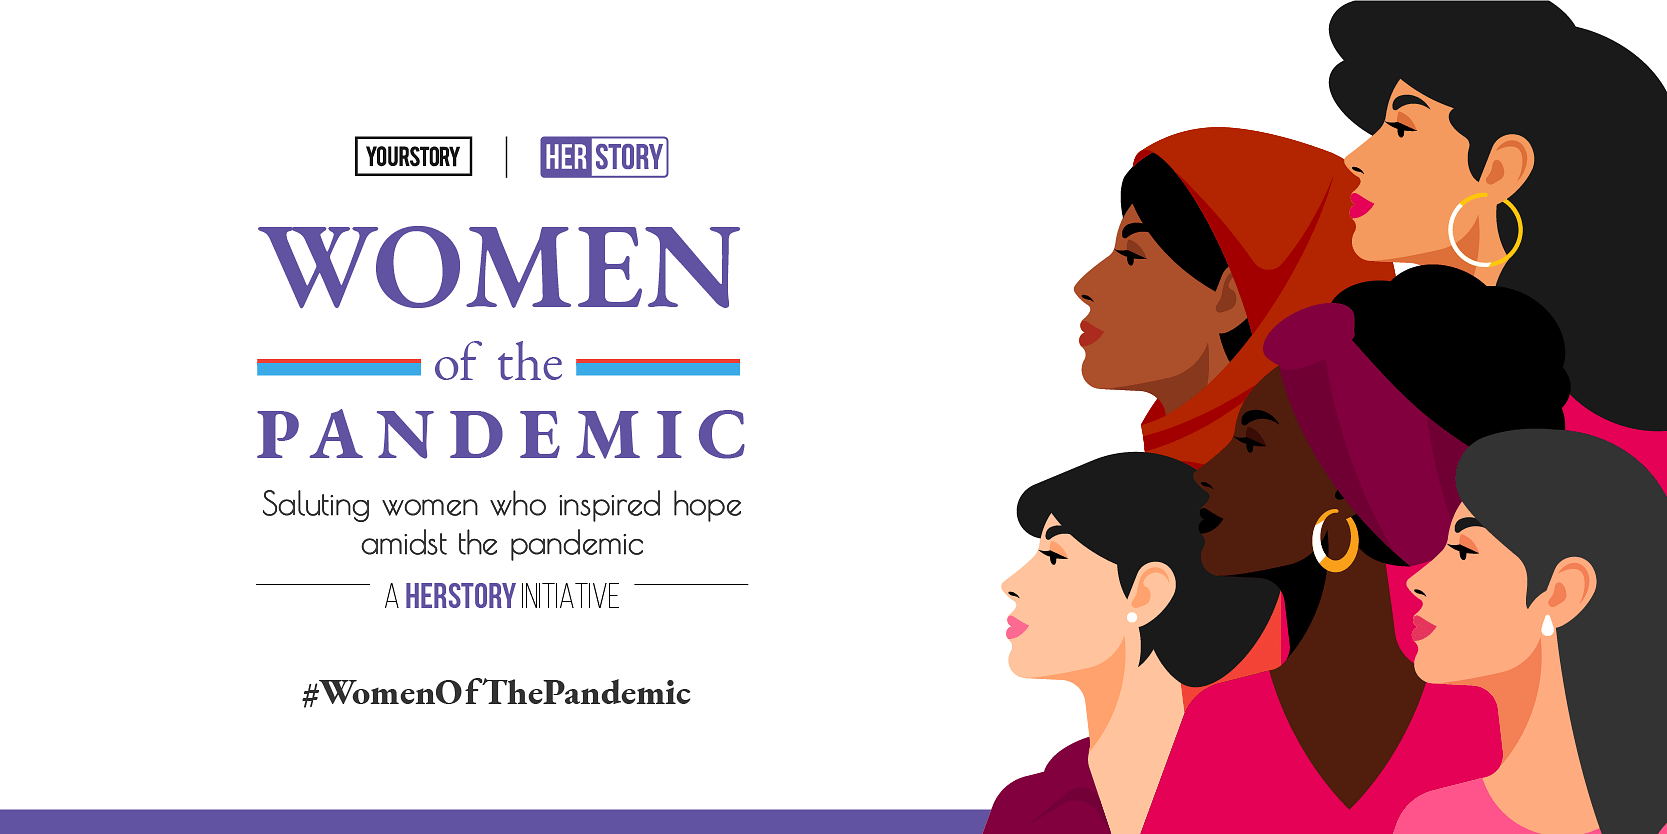 [Women of the Pandemic] Operating in ‘bunker mode’ - what Upasna Dash learnt in the year of the pandemic 

